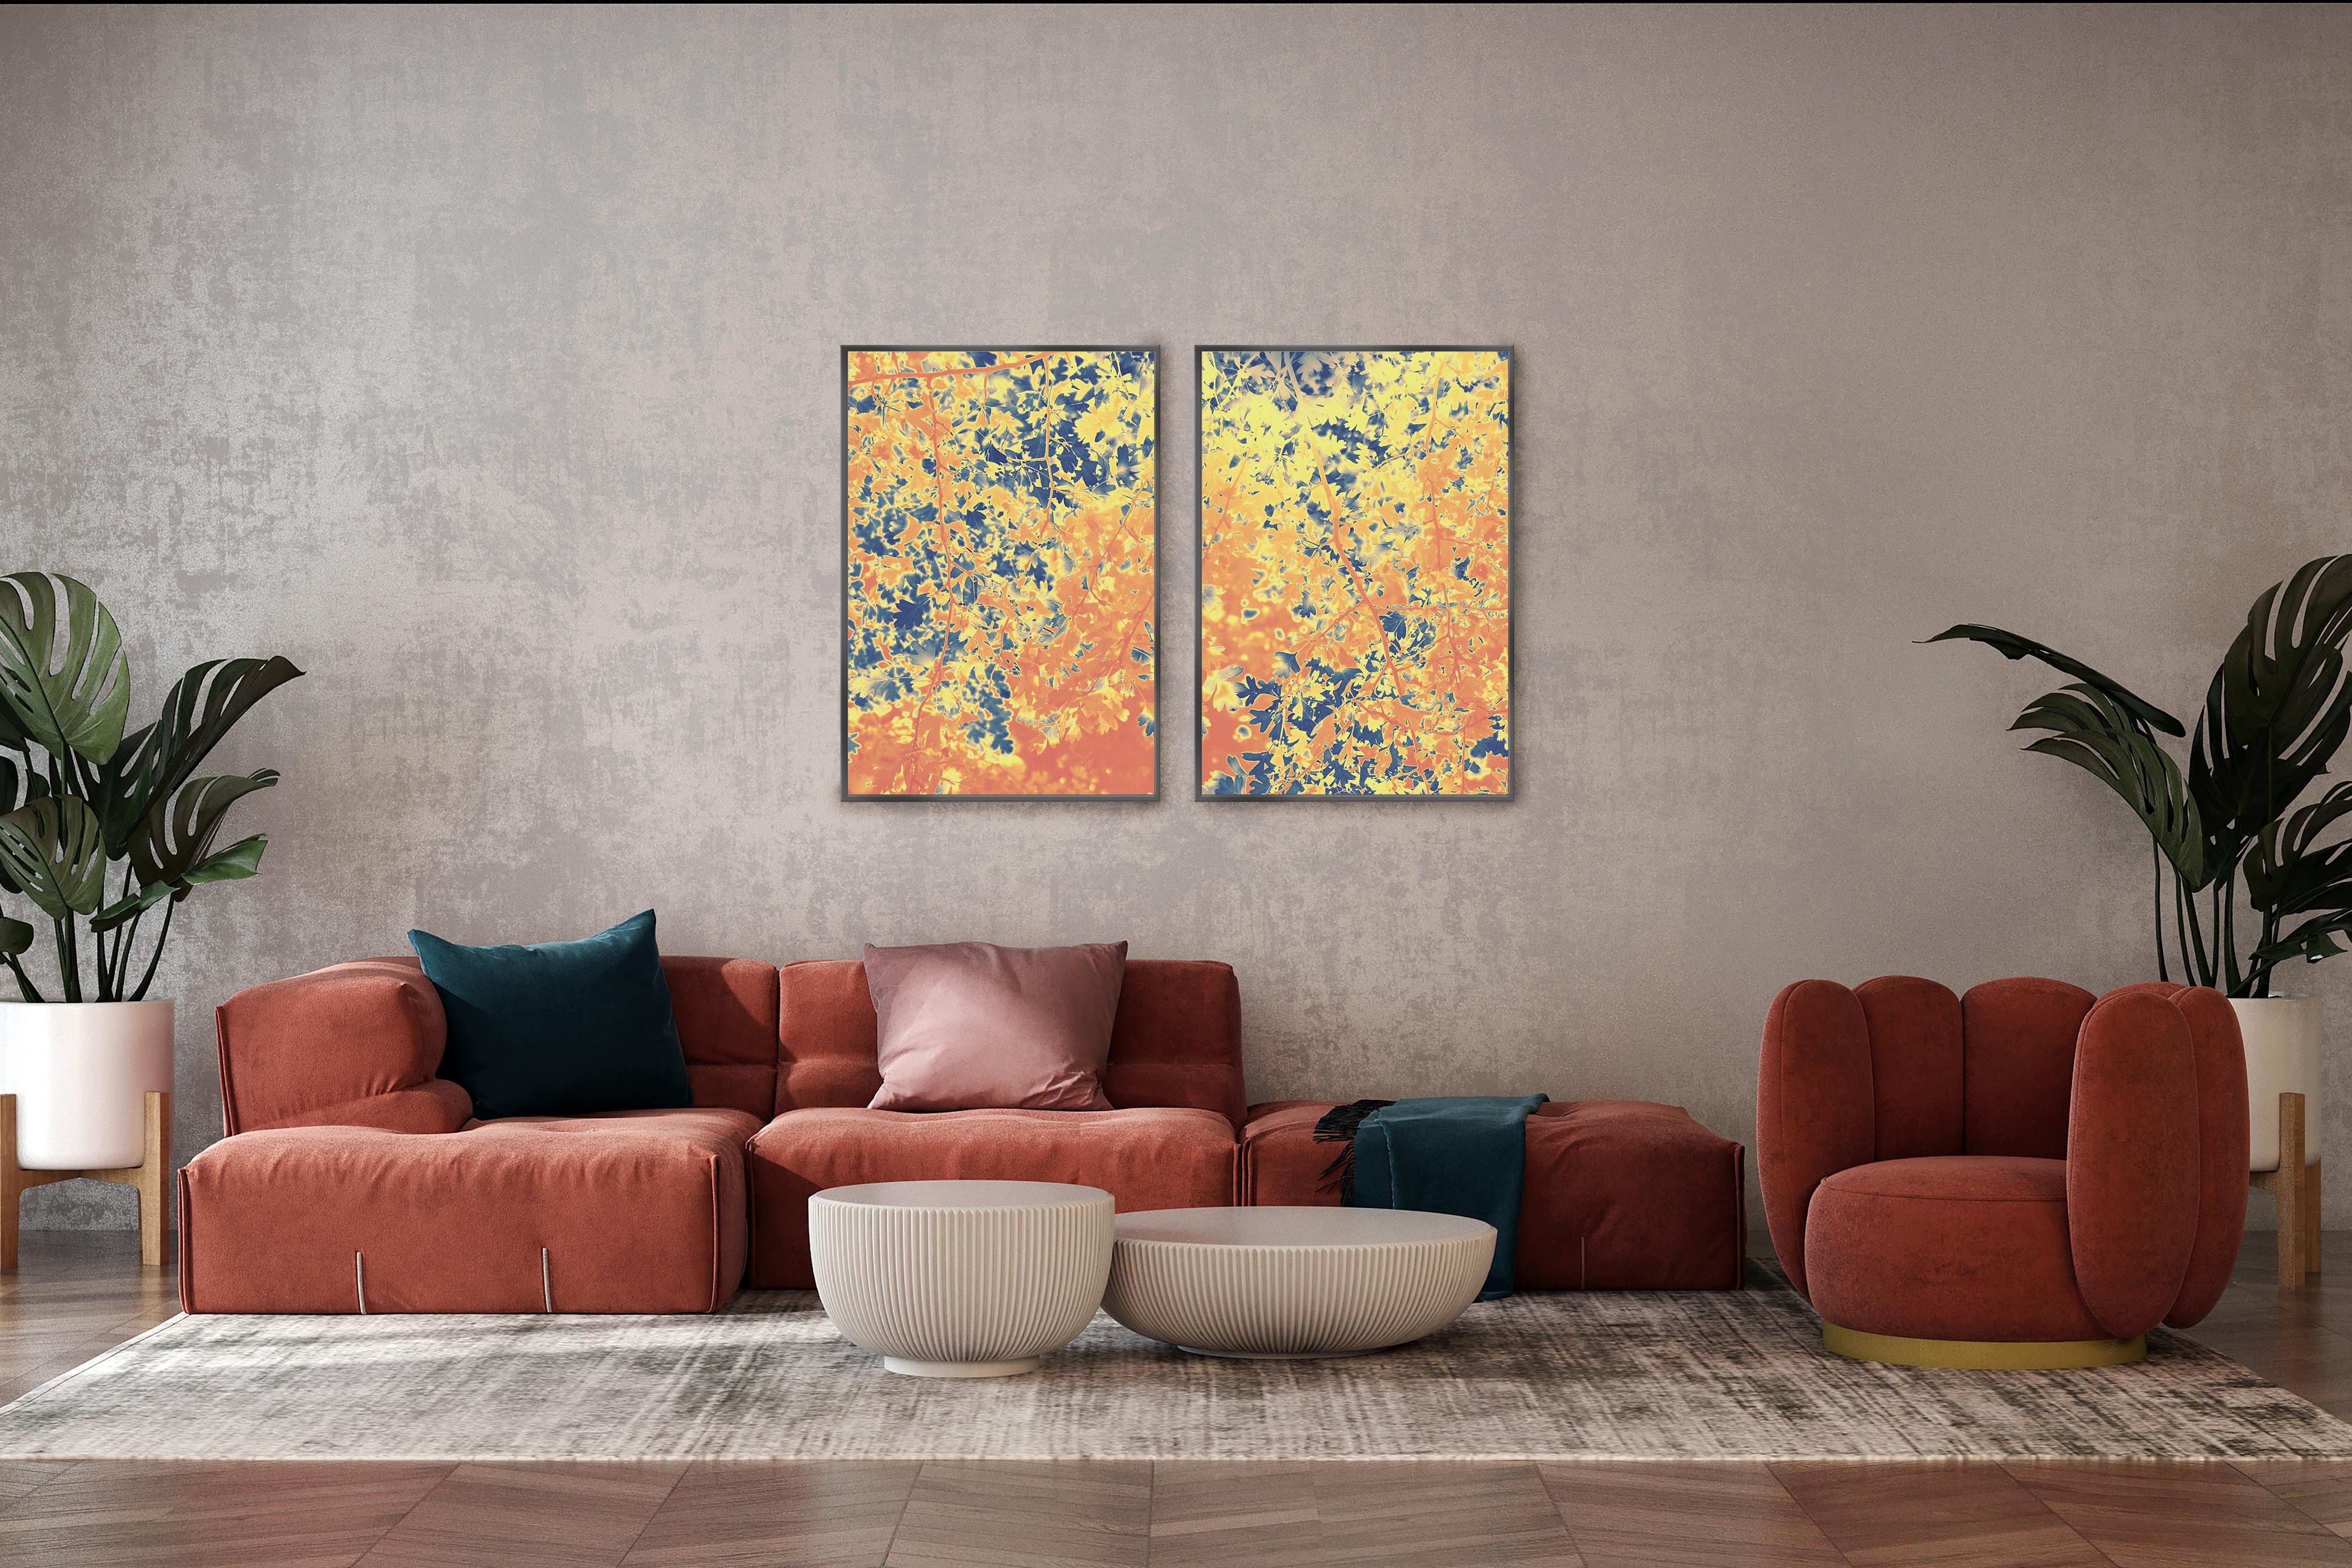 Forest Embers, Giclée Print Diptych Landscape, Warm Tons Abstract Autumn Leaves  - Abstract Impressionist Photograph by Ryan Rivadeneyra